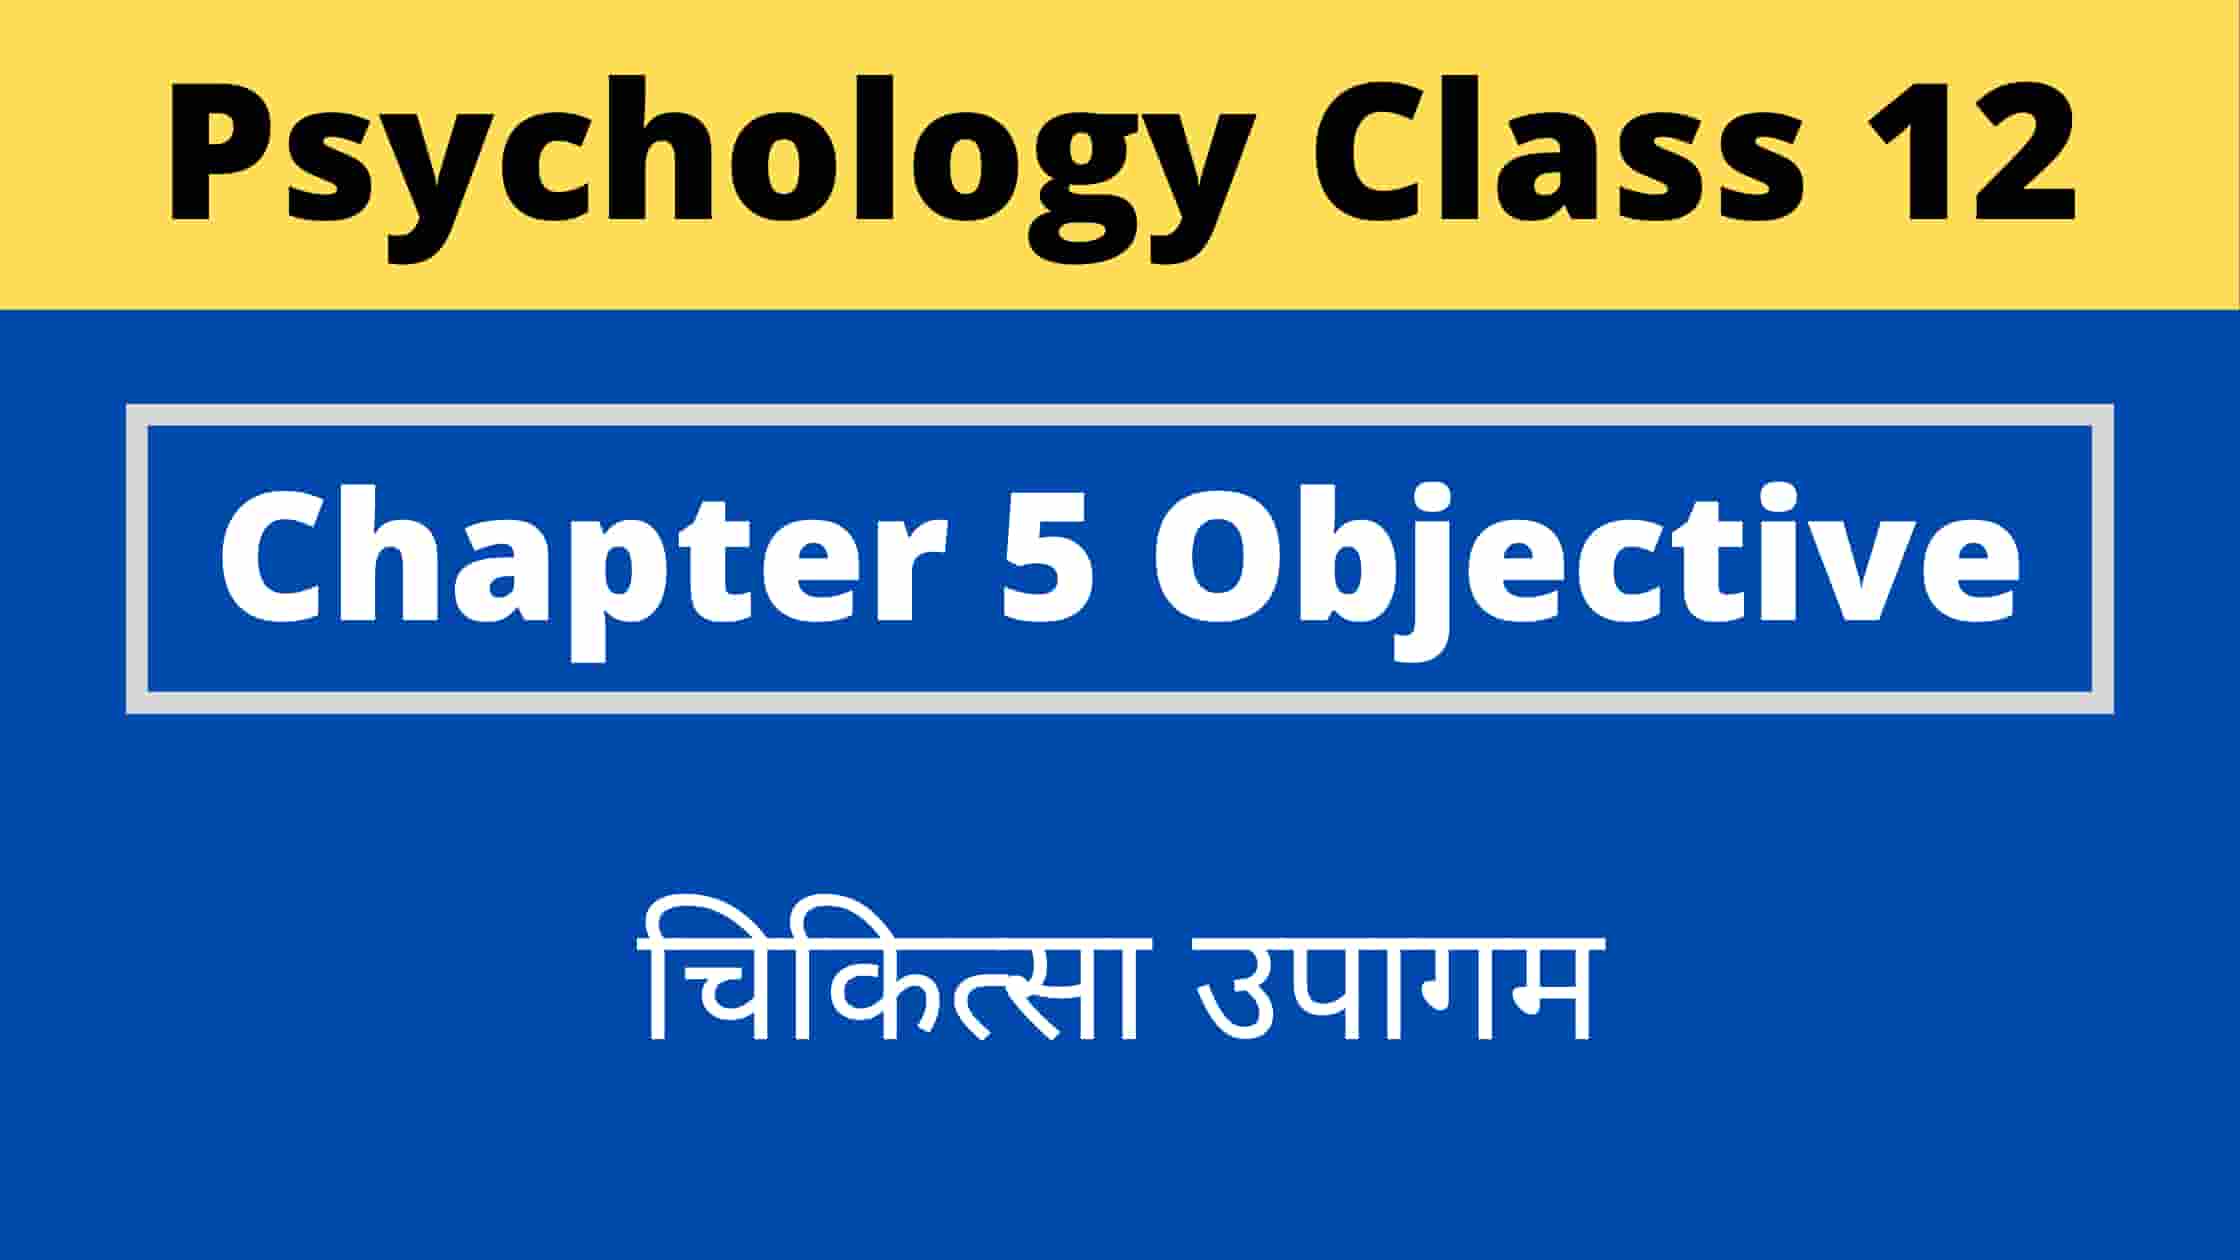 You are currently viewing Psychology Class 12 Chapter 5